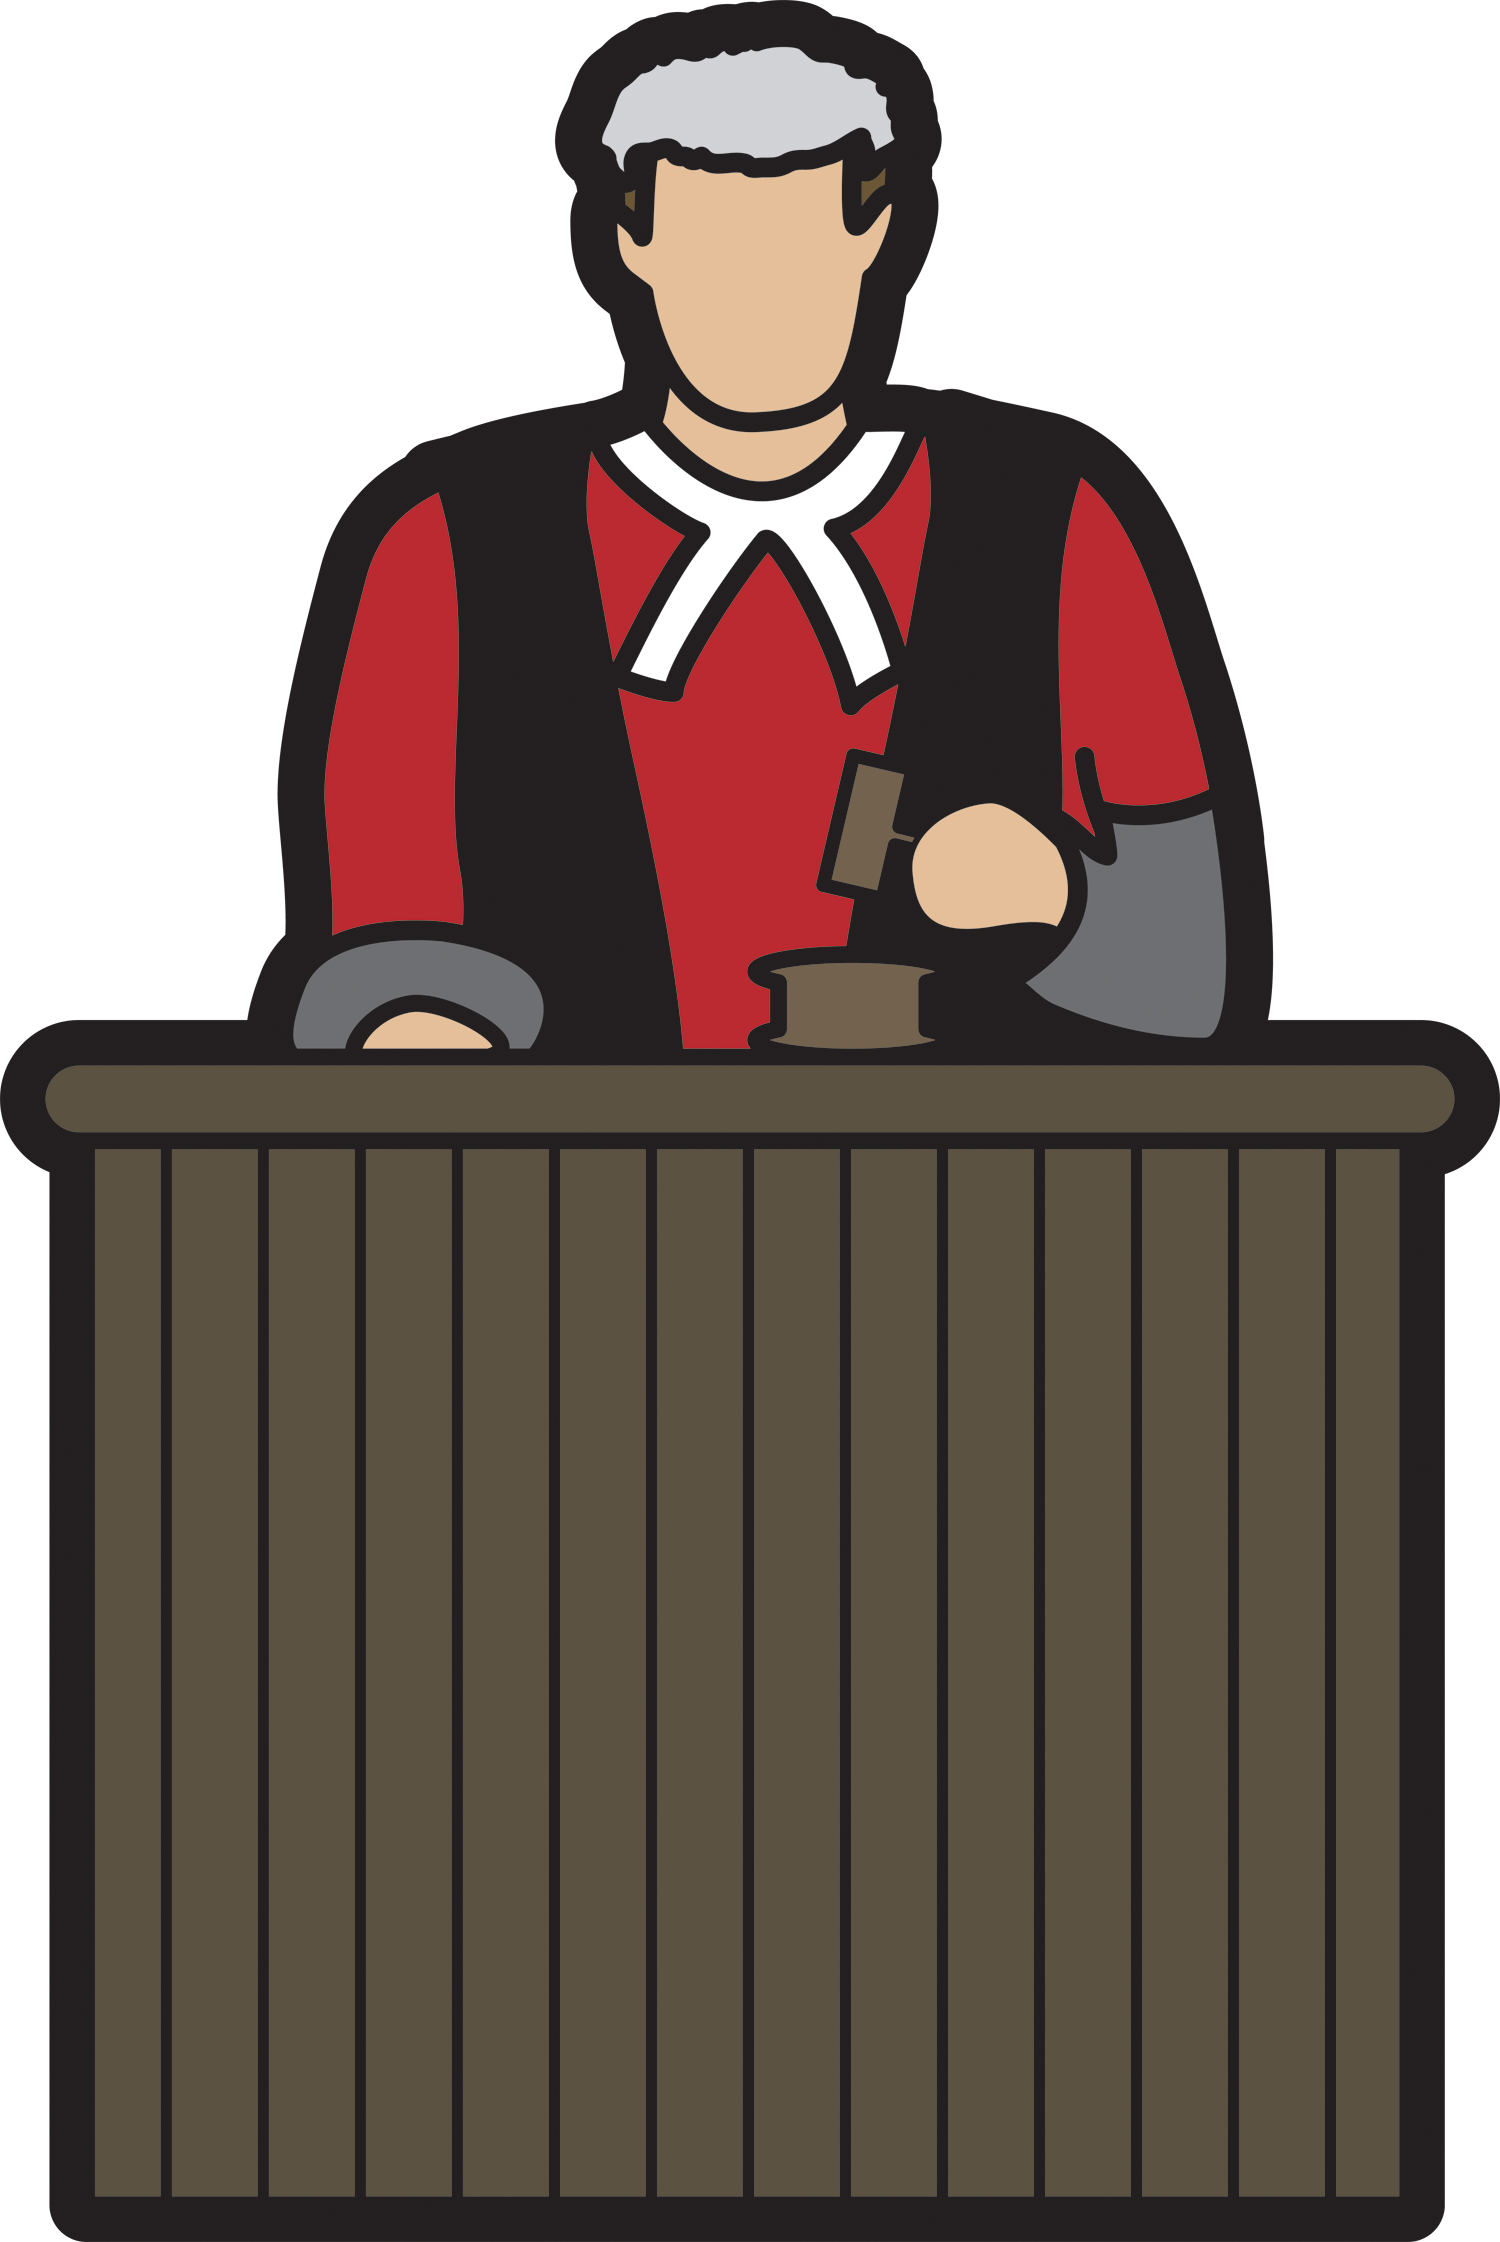  collection of judge. Justice clipart public trial